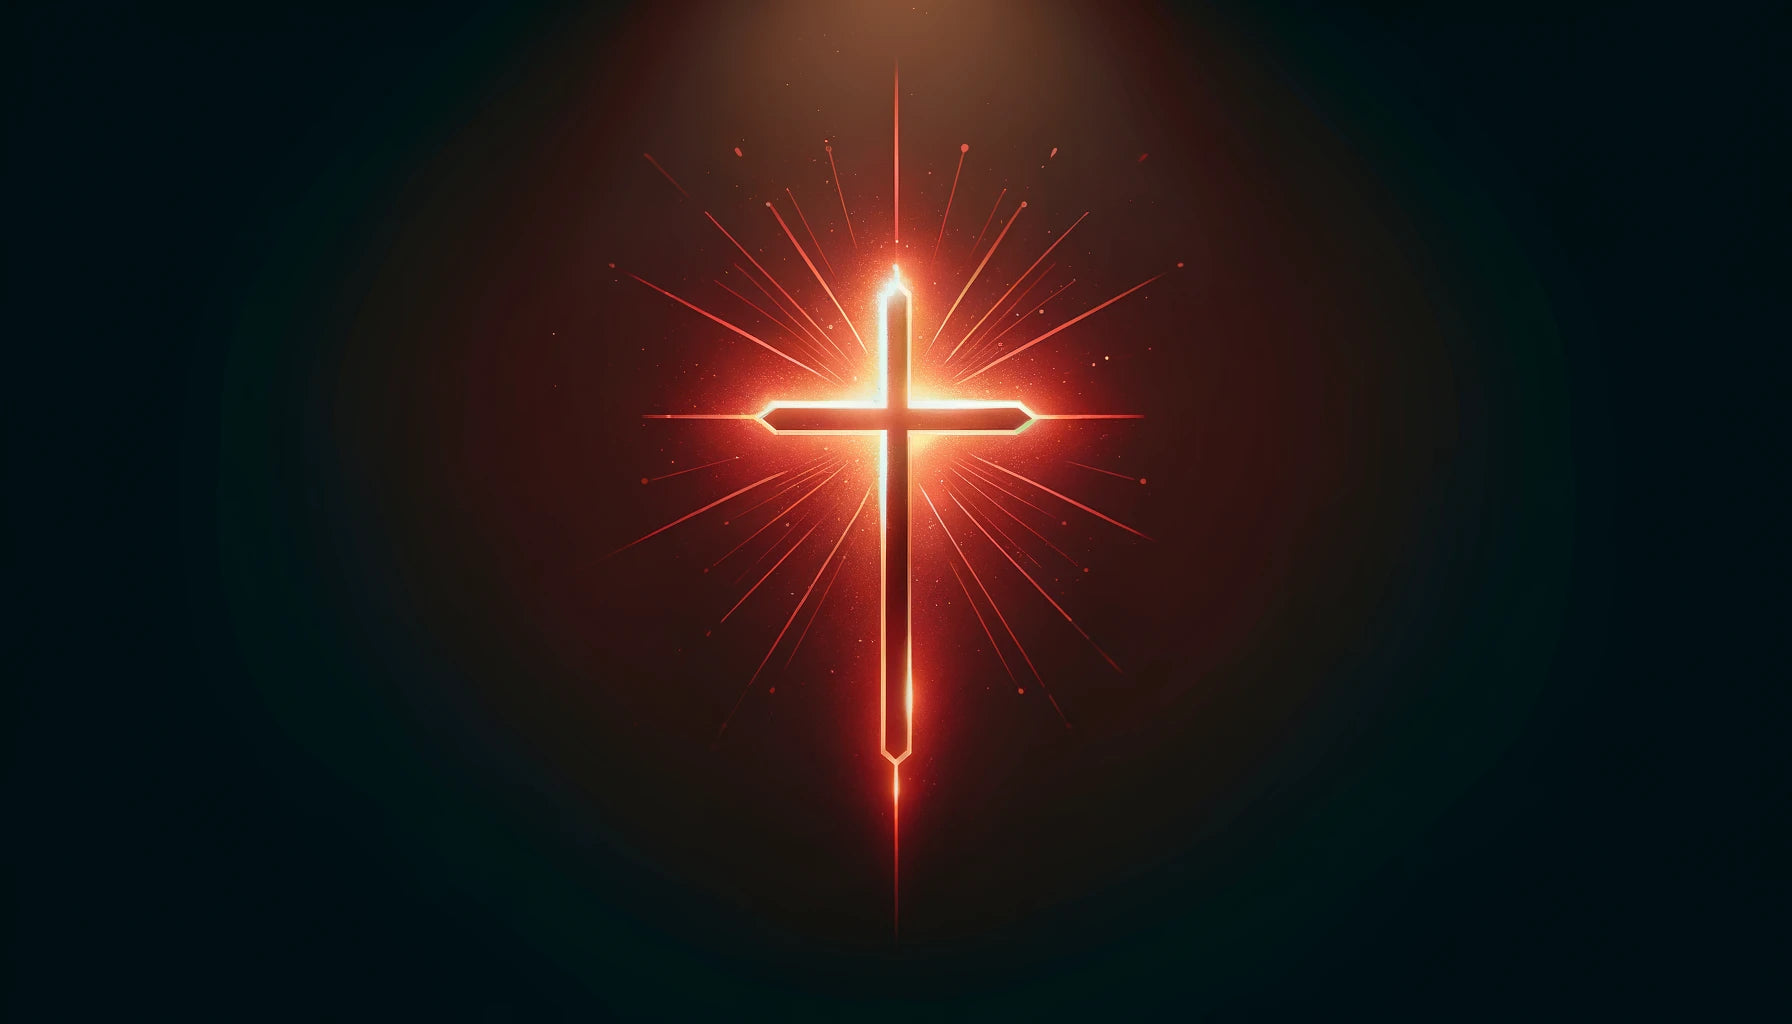 DALL·E 2024-04-14 12.07.33 - Create a powerful and symbolic image focused on a glowing cross, emphasizing a deep red color theme (#841703). The cross should be designed with a rad.webp__PID:0dfd2657-cfab-4207-8373-29d007aa205c